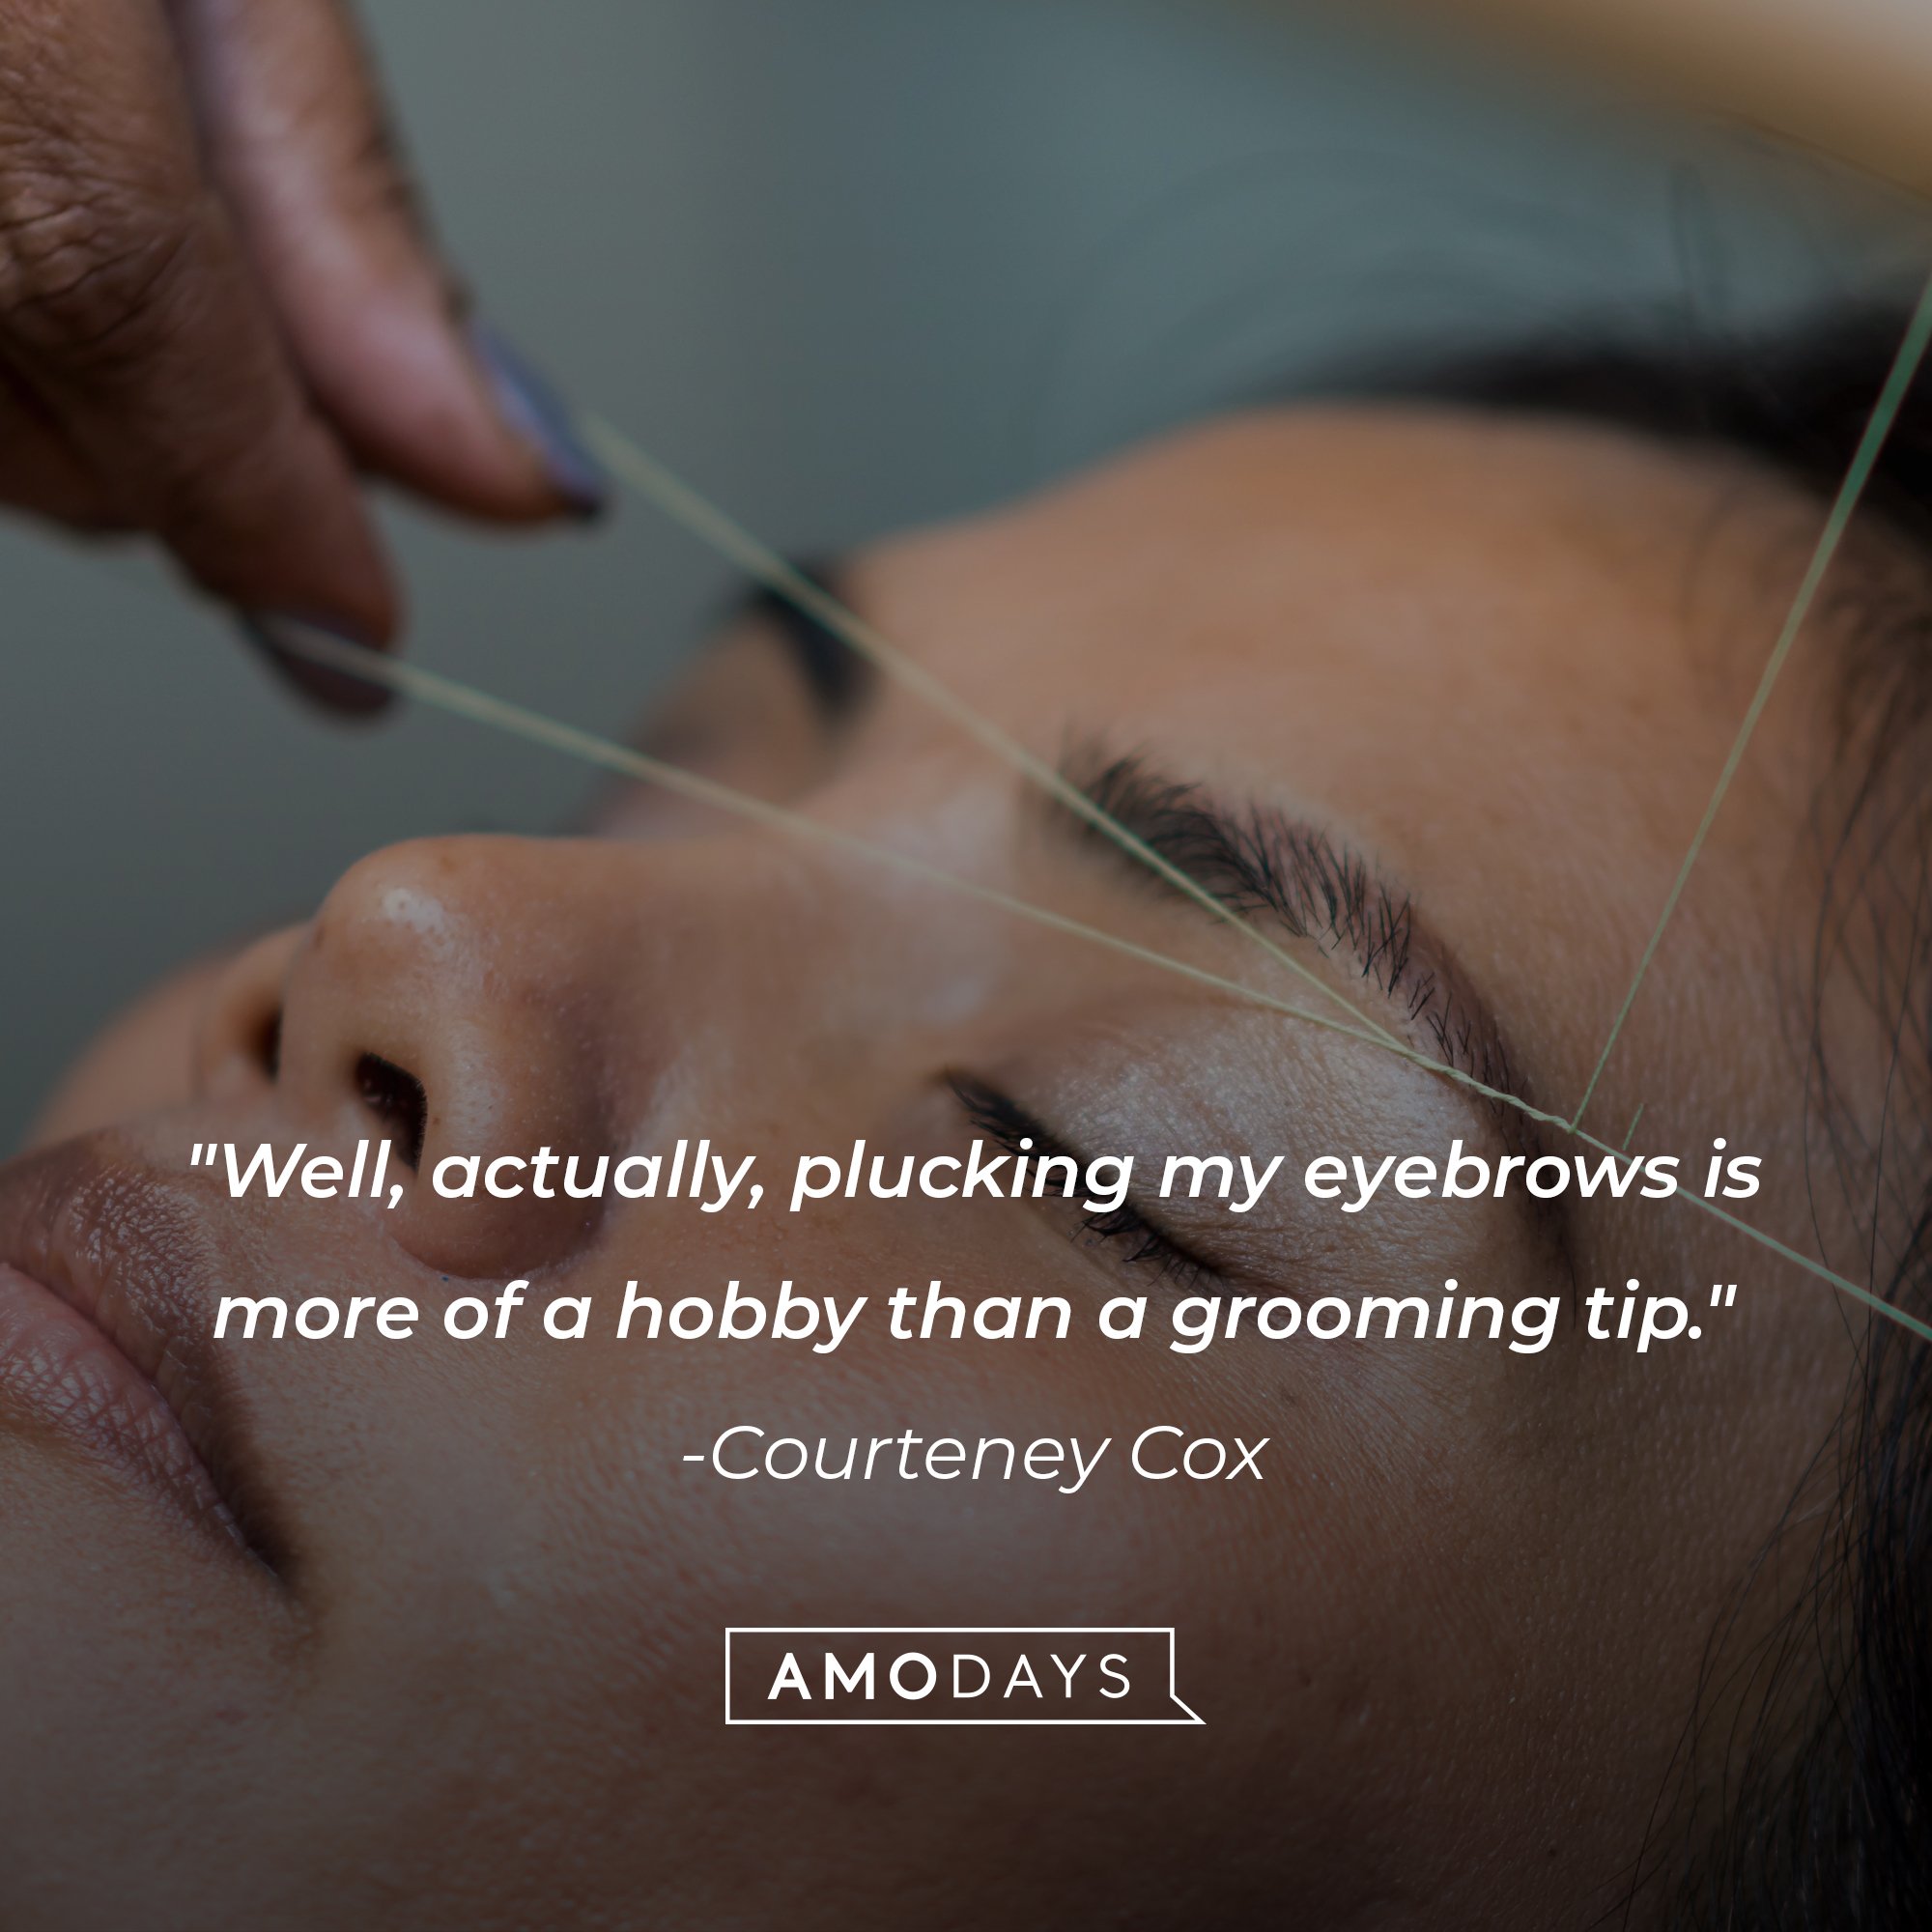 Courteney Cox’s quote: "Well, actually, plucking my eyebrows is more of a hobby than a grooming tip." | Image: AmoDays  